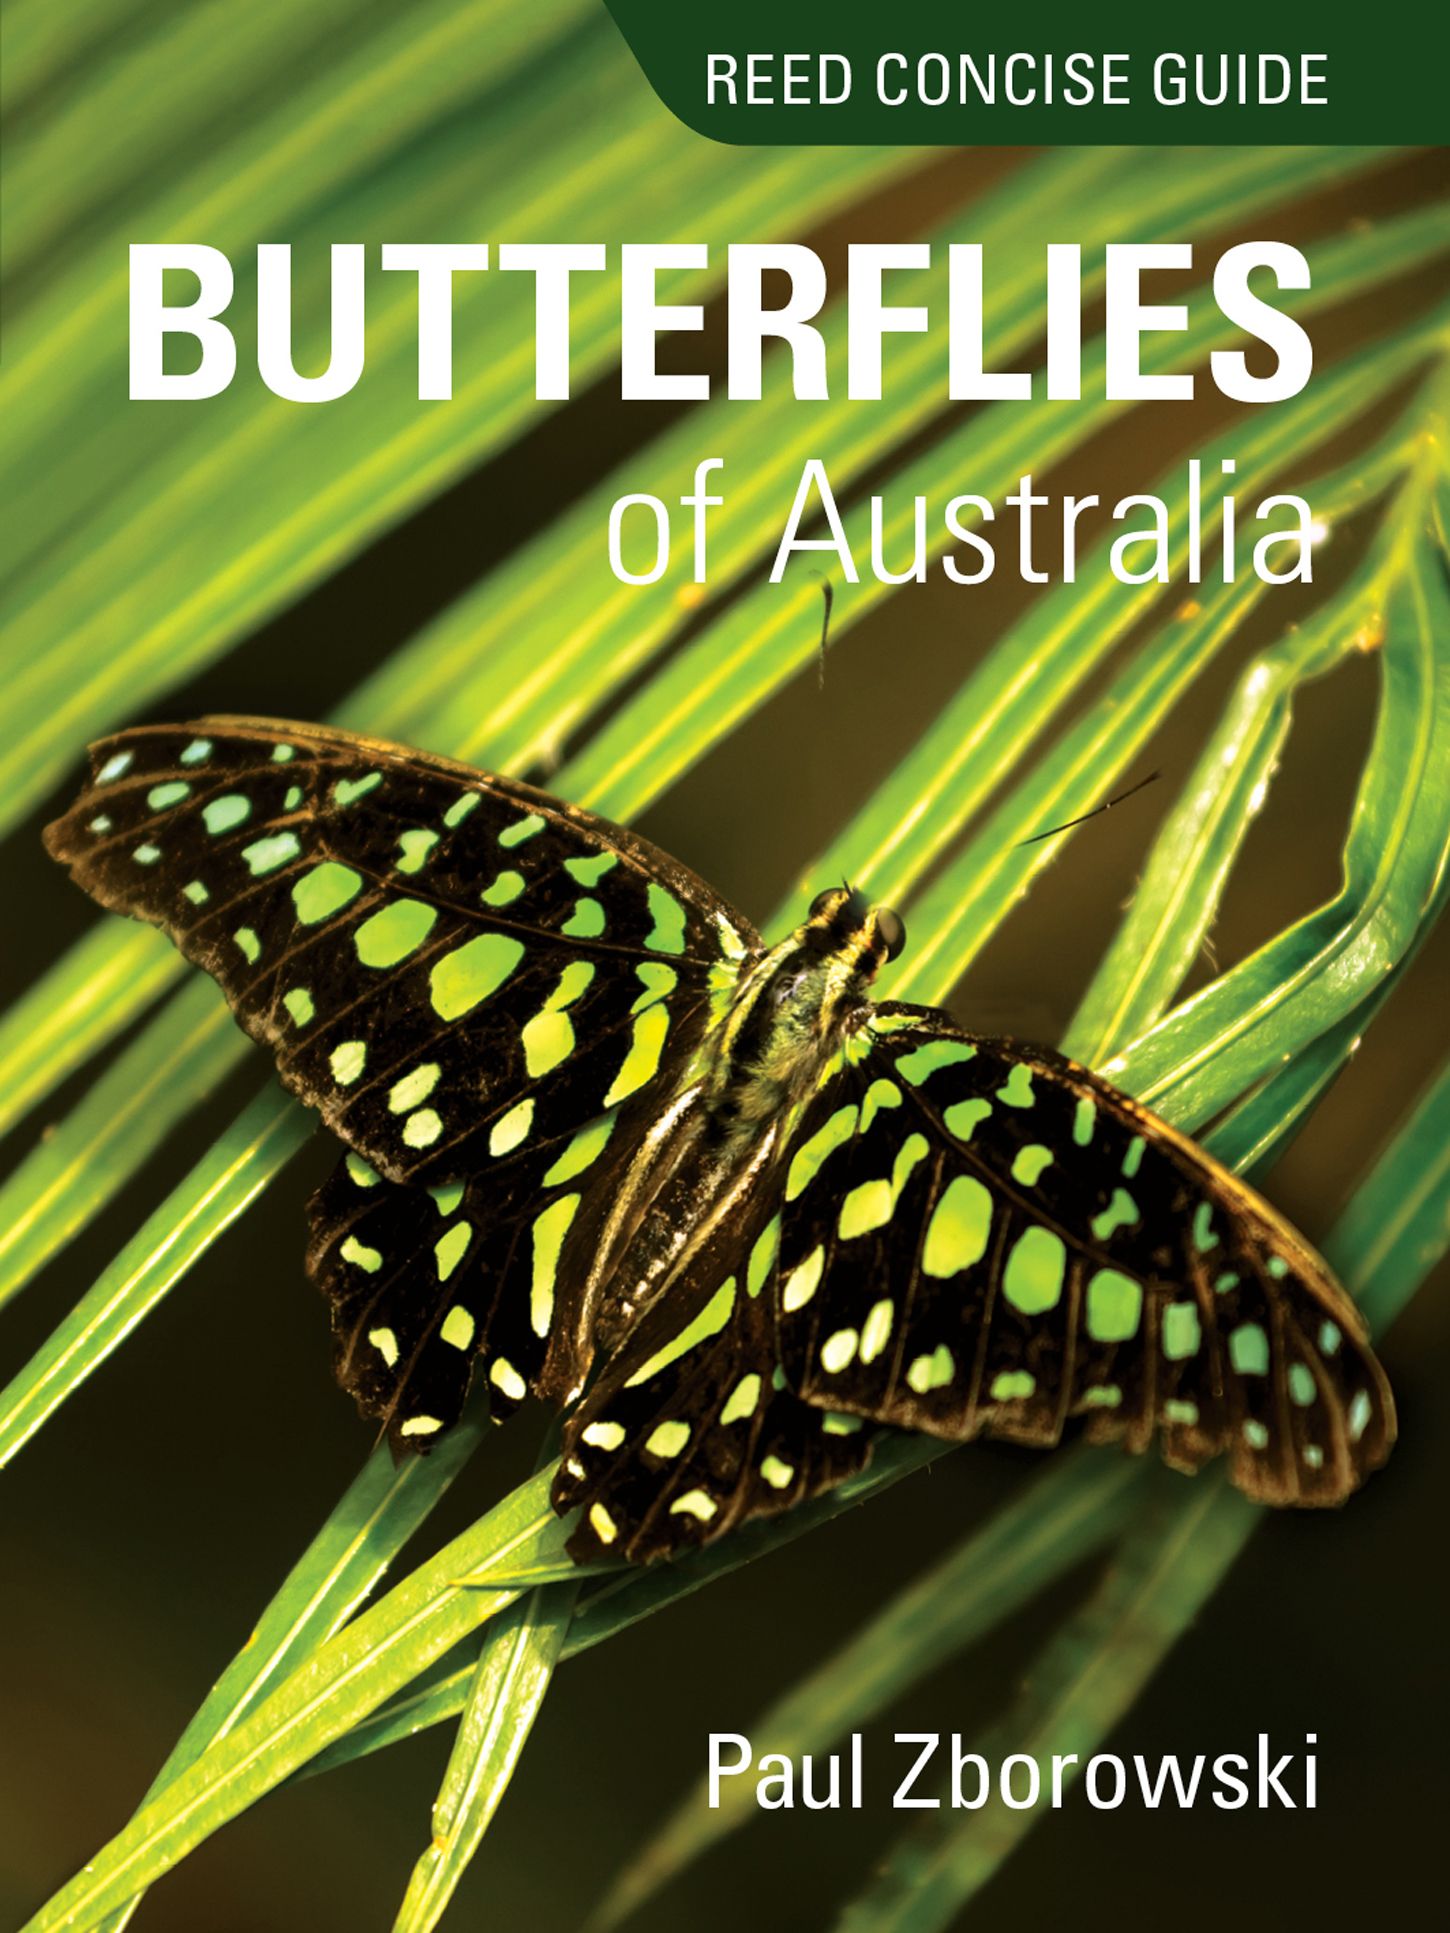 Reed Concise Guide: Butterflies of Australia